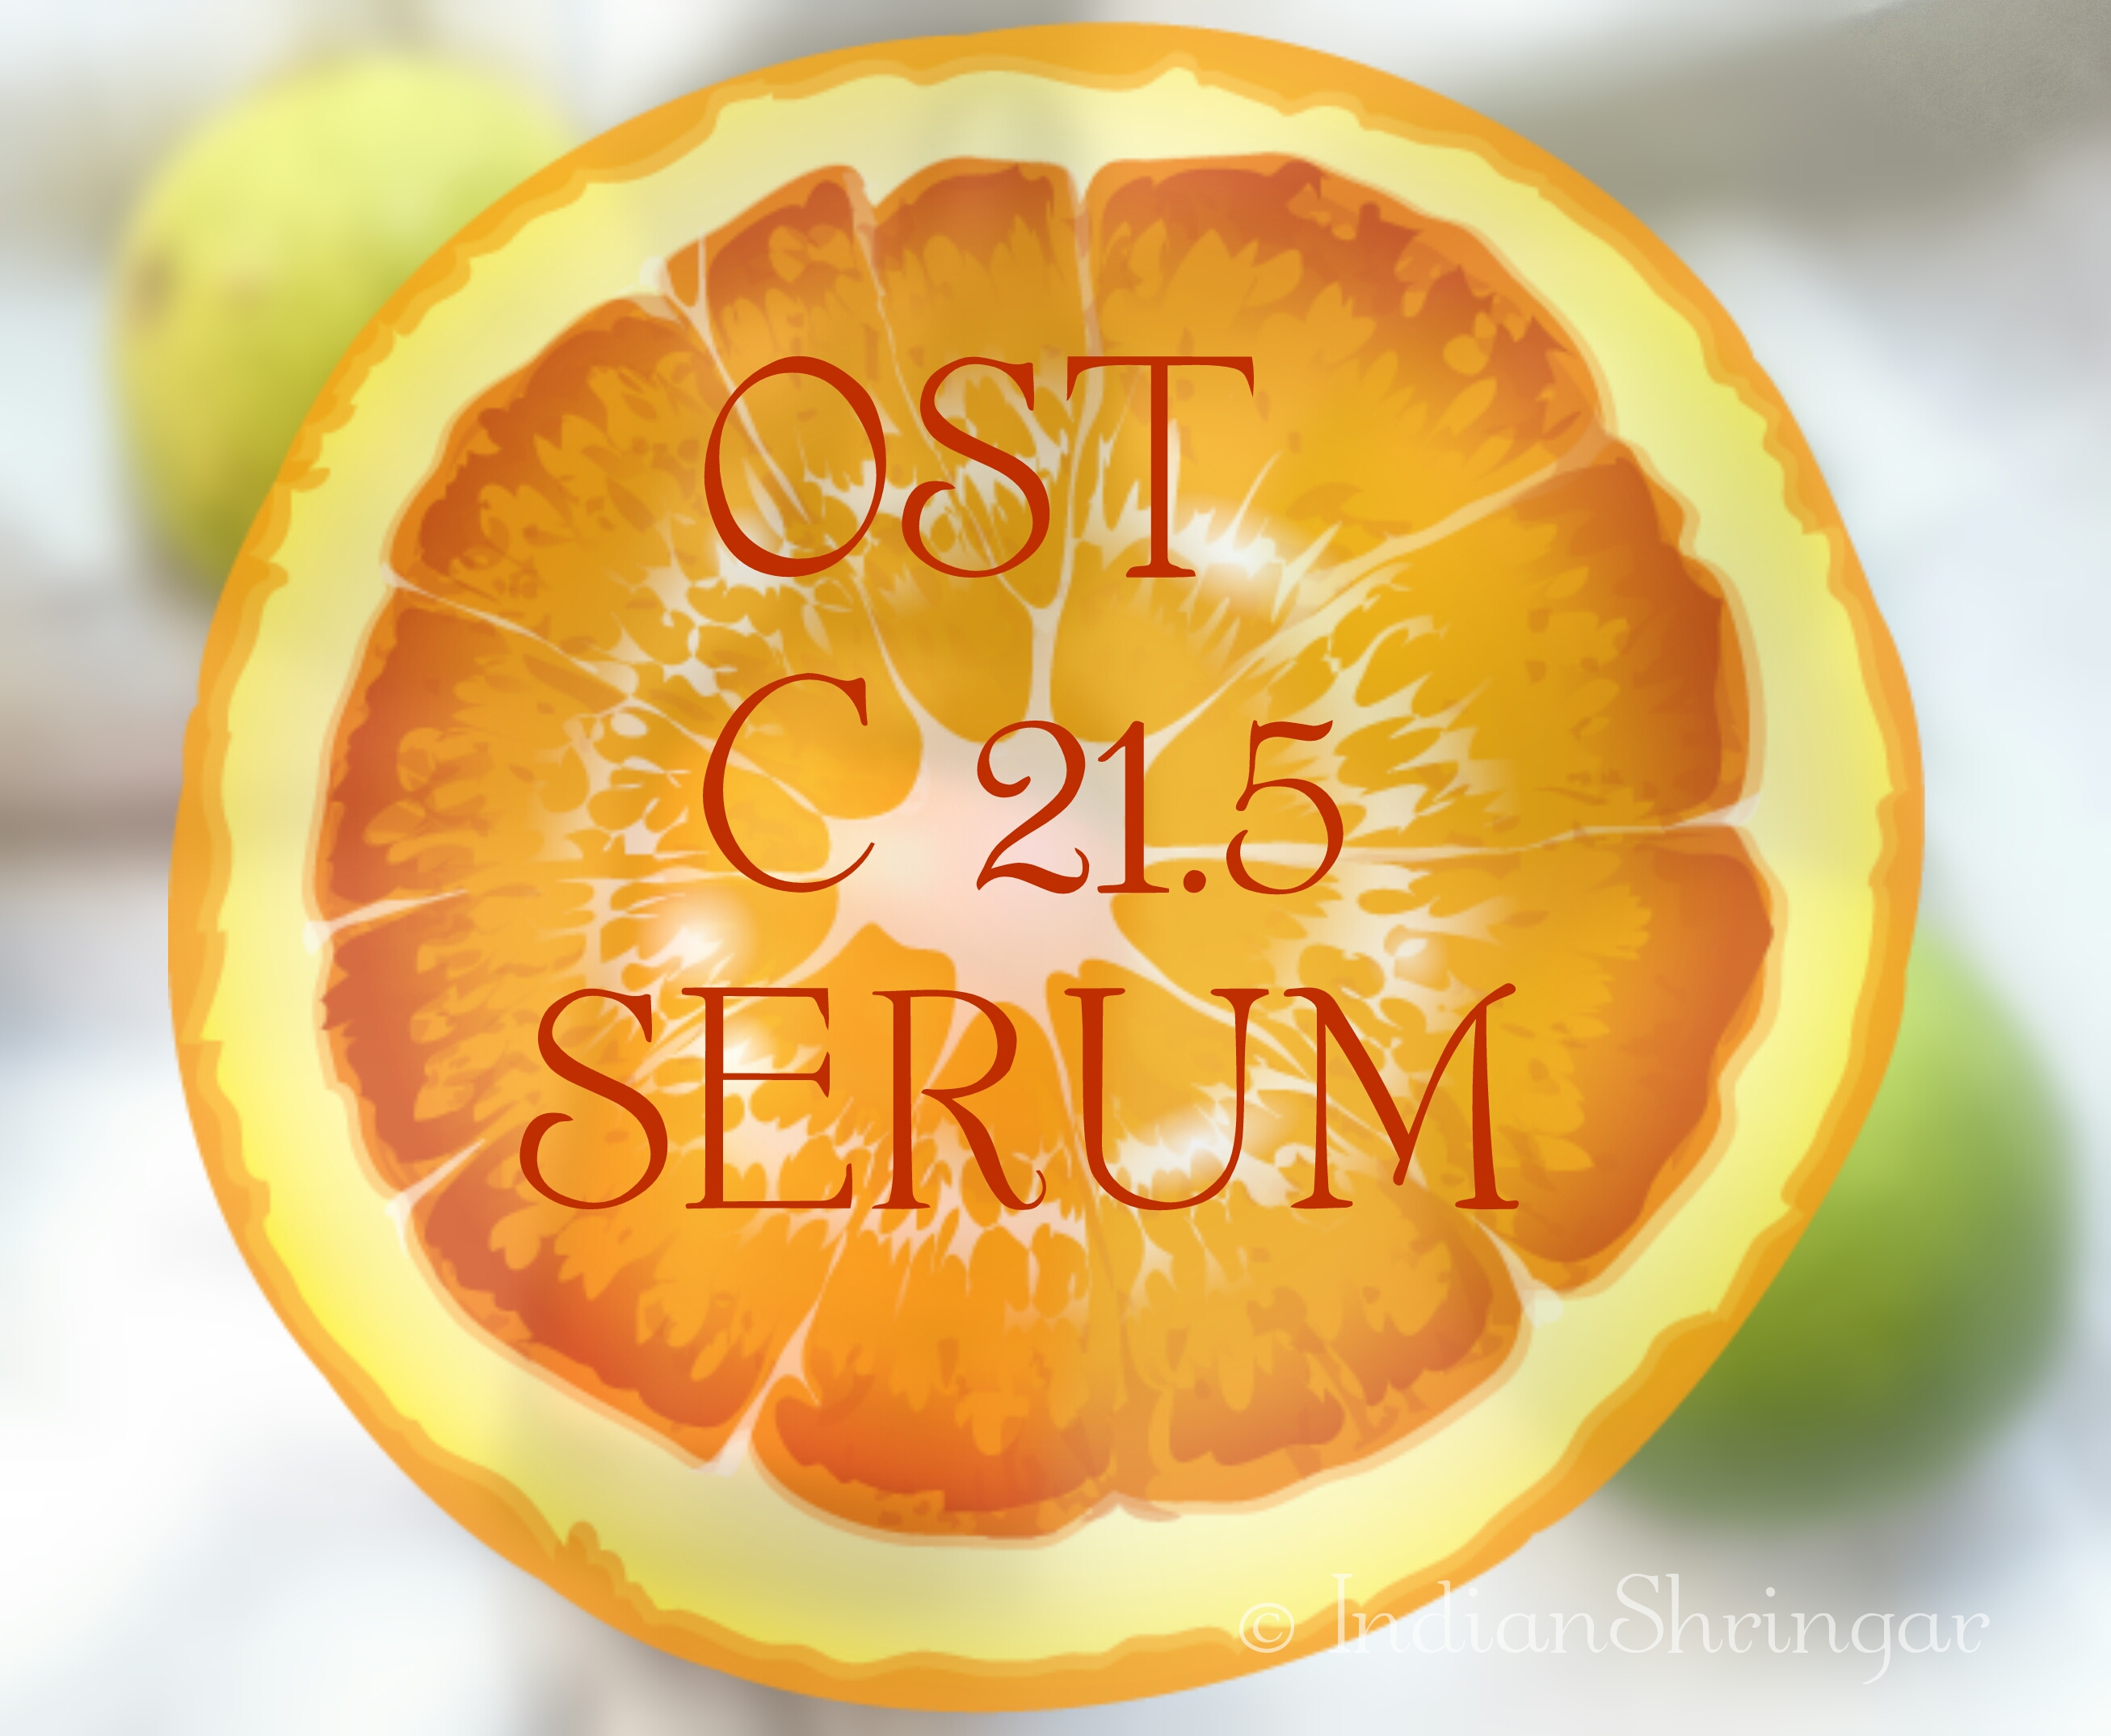 OST C21.5 Serum review